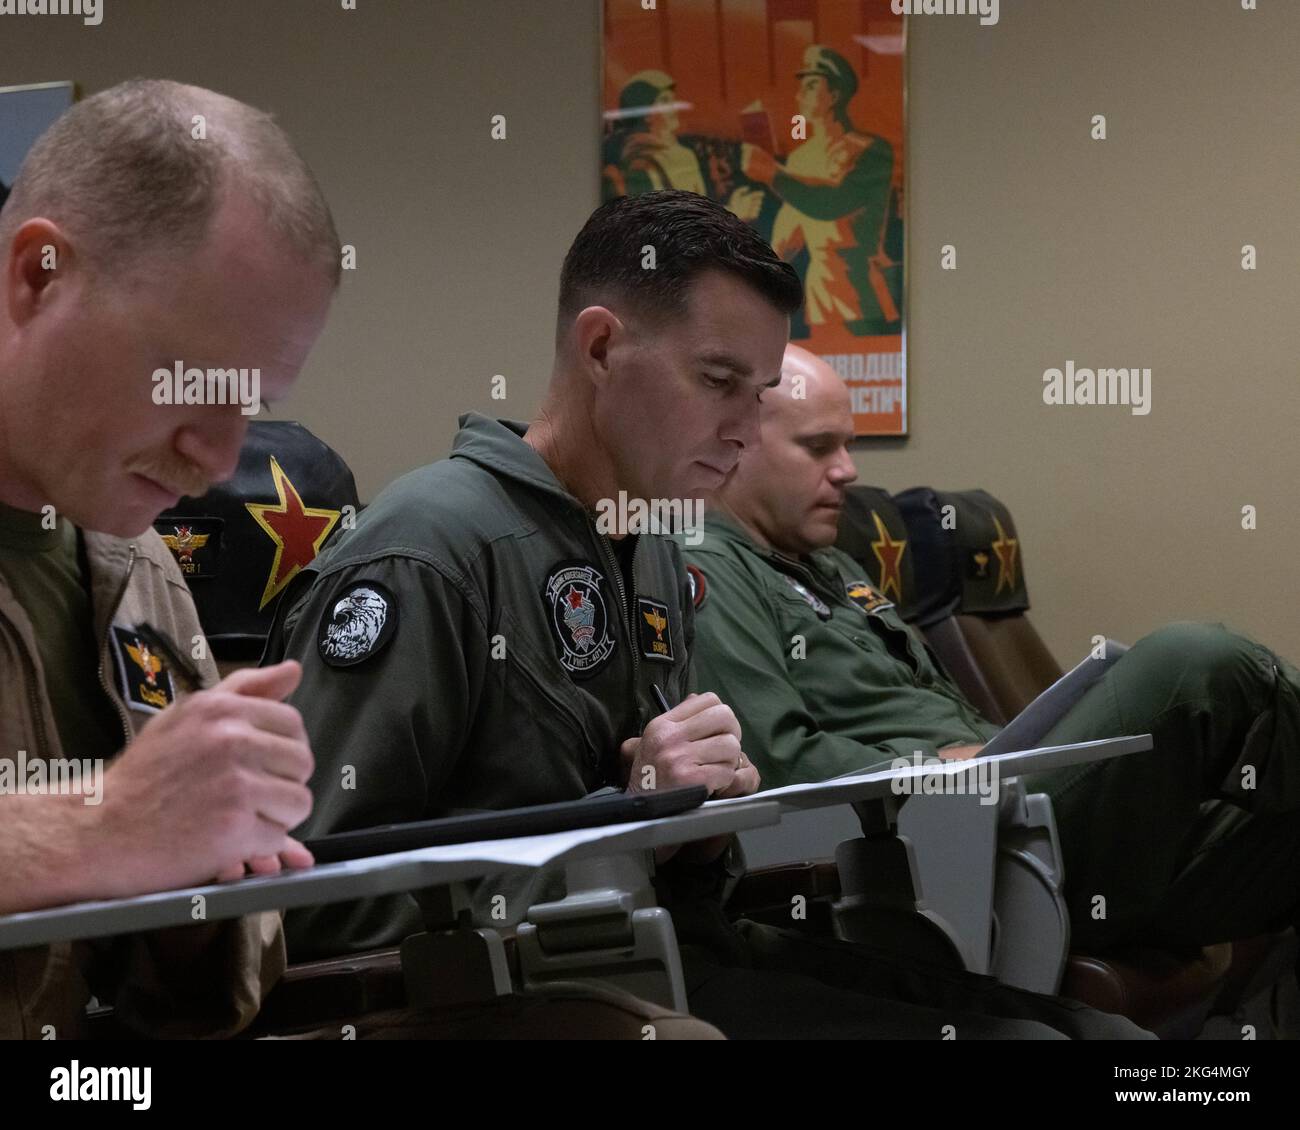 U.S. Marines from various units in the Marine Corps participate in a flight brief given by Lt. Col. Michael Webb, executive officer, Marine Fighter Training Squadron 401 (VMFT-401), Marine Aircraft Group 41, 4th Marine Aircraft Wing, at Marine Corps Air Station Yuma, Arizona, Oct. 28, 2022. VMFT-401 is the only adversary squadron with the mission to act as the opposing force in simulated air combat. Stock Photo